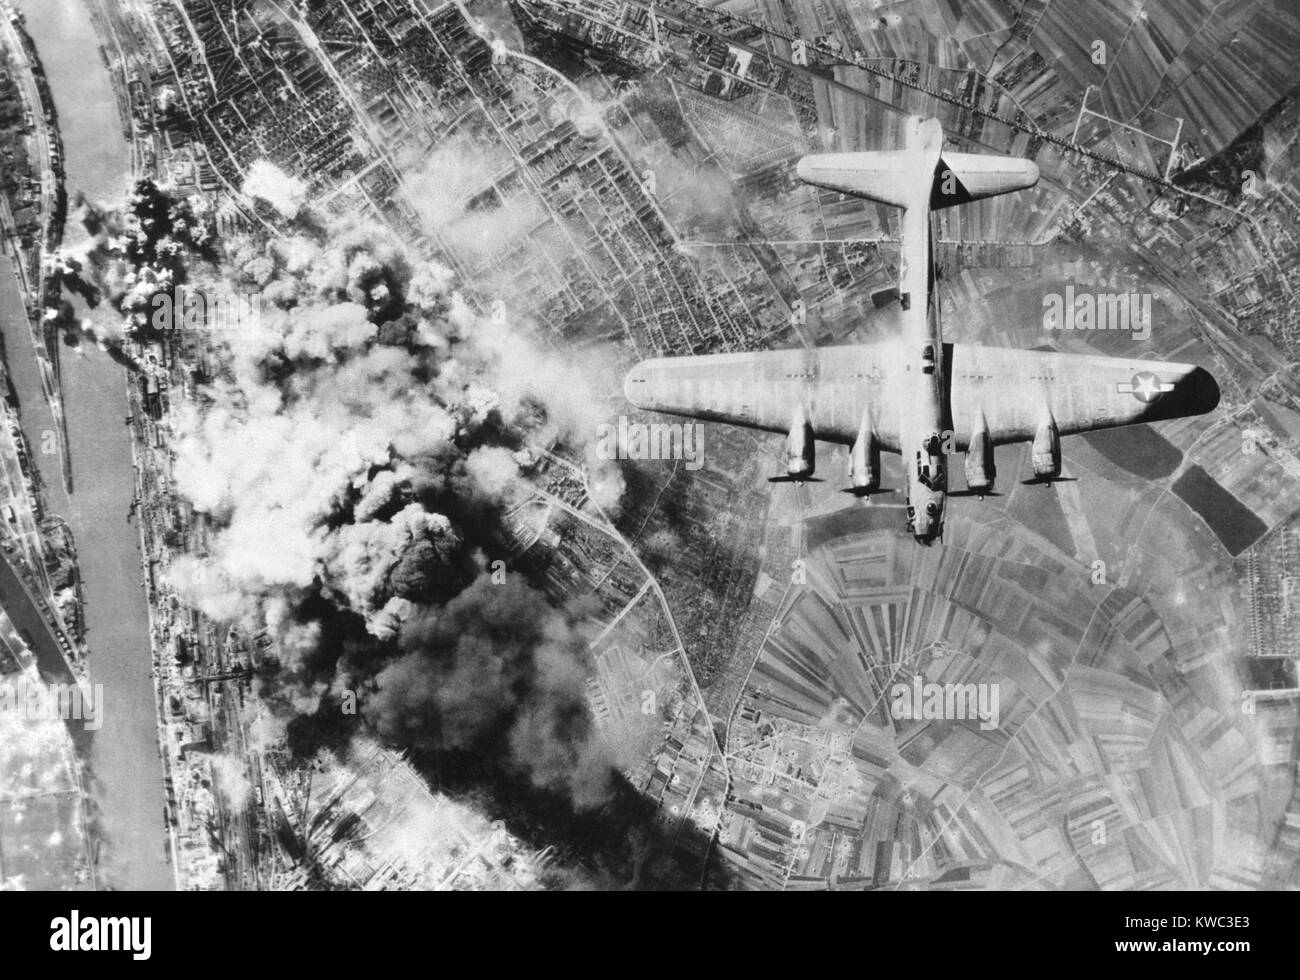 American B-17 flying fortresses bombs Ludwigshafen chemical and synthetic oil works, Germany. World War2, Sept. 29, 1944. (BSLOC 2015 13 65) Stock Photo